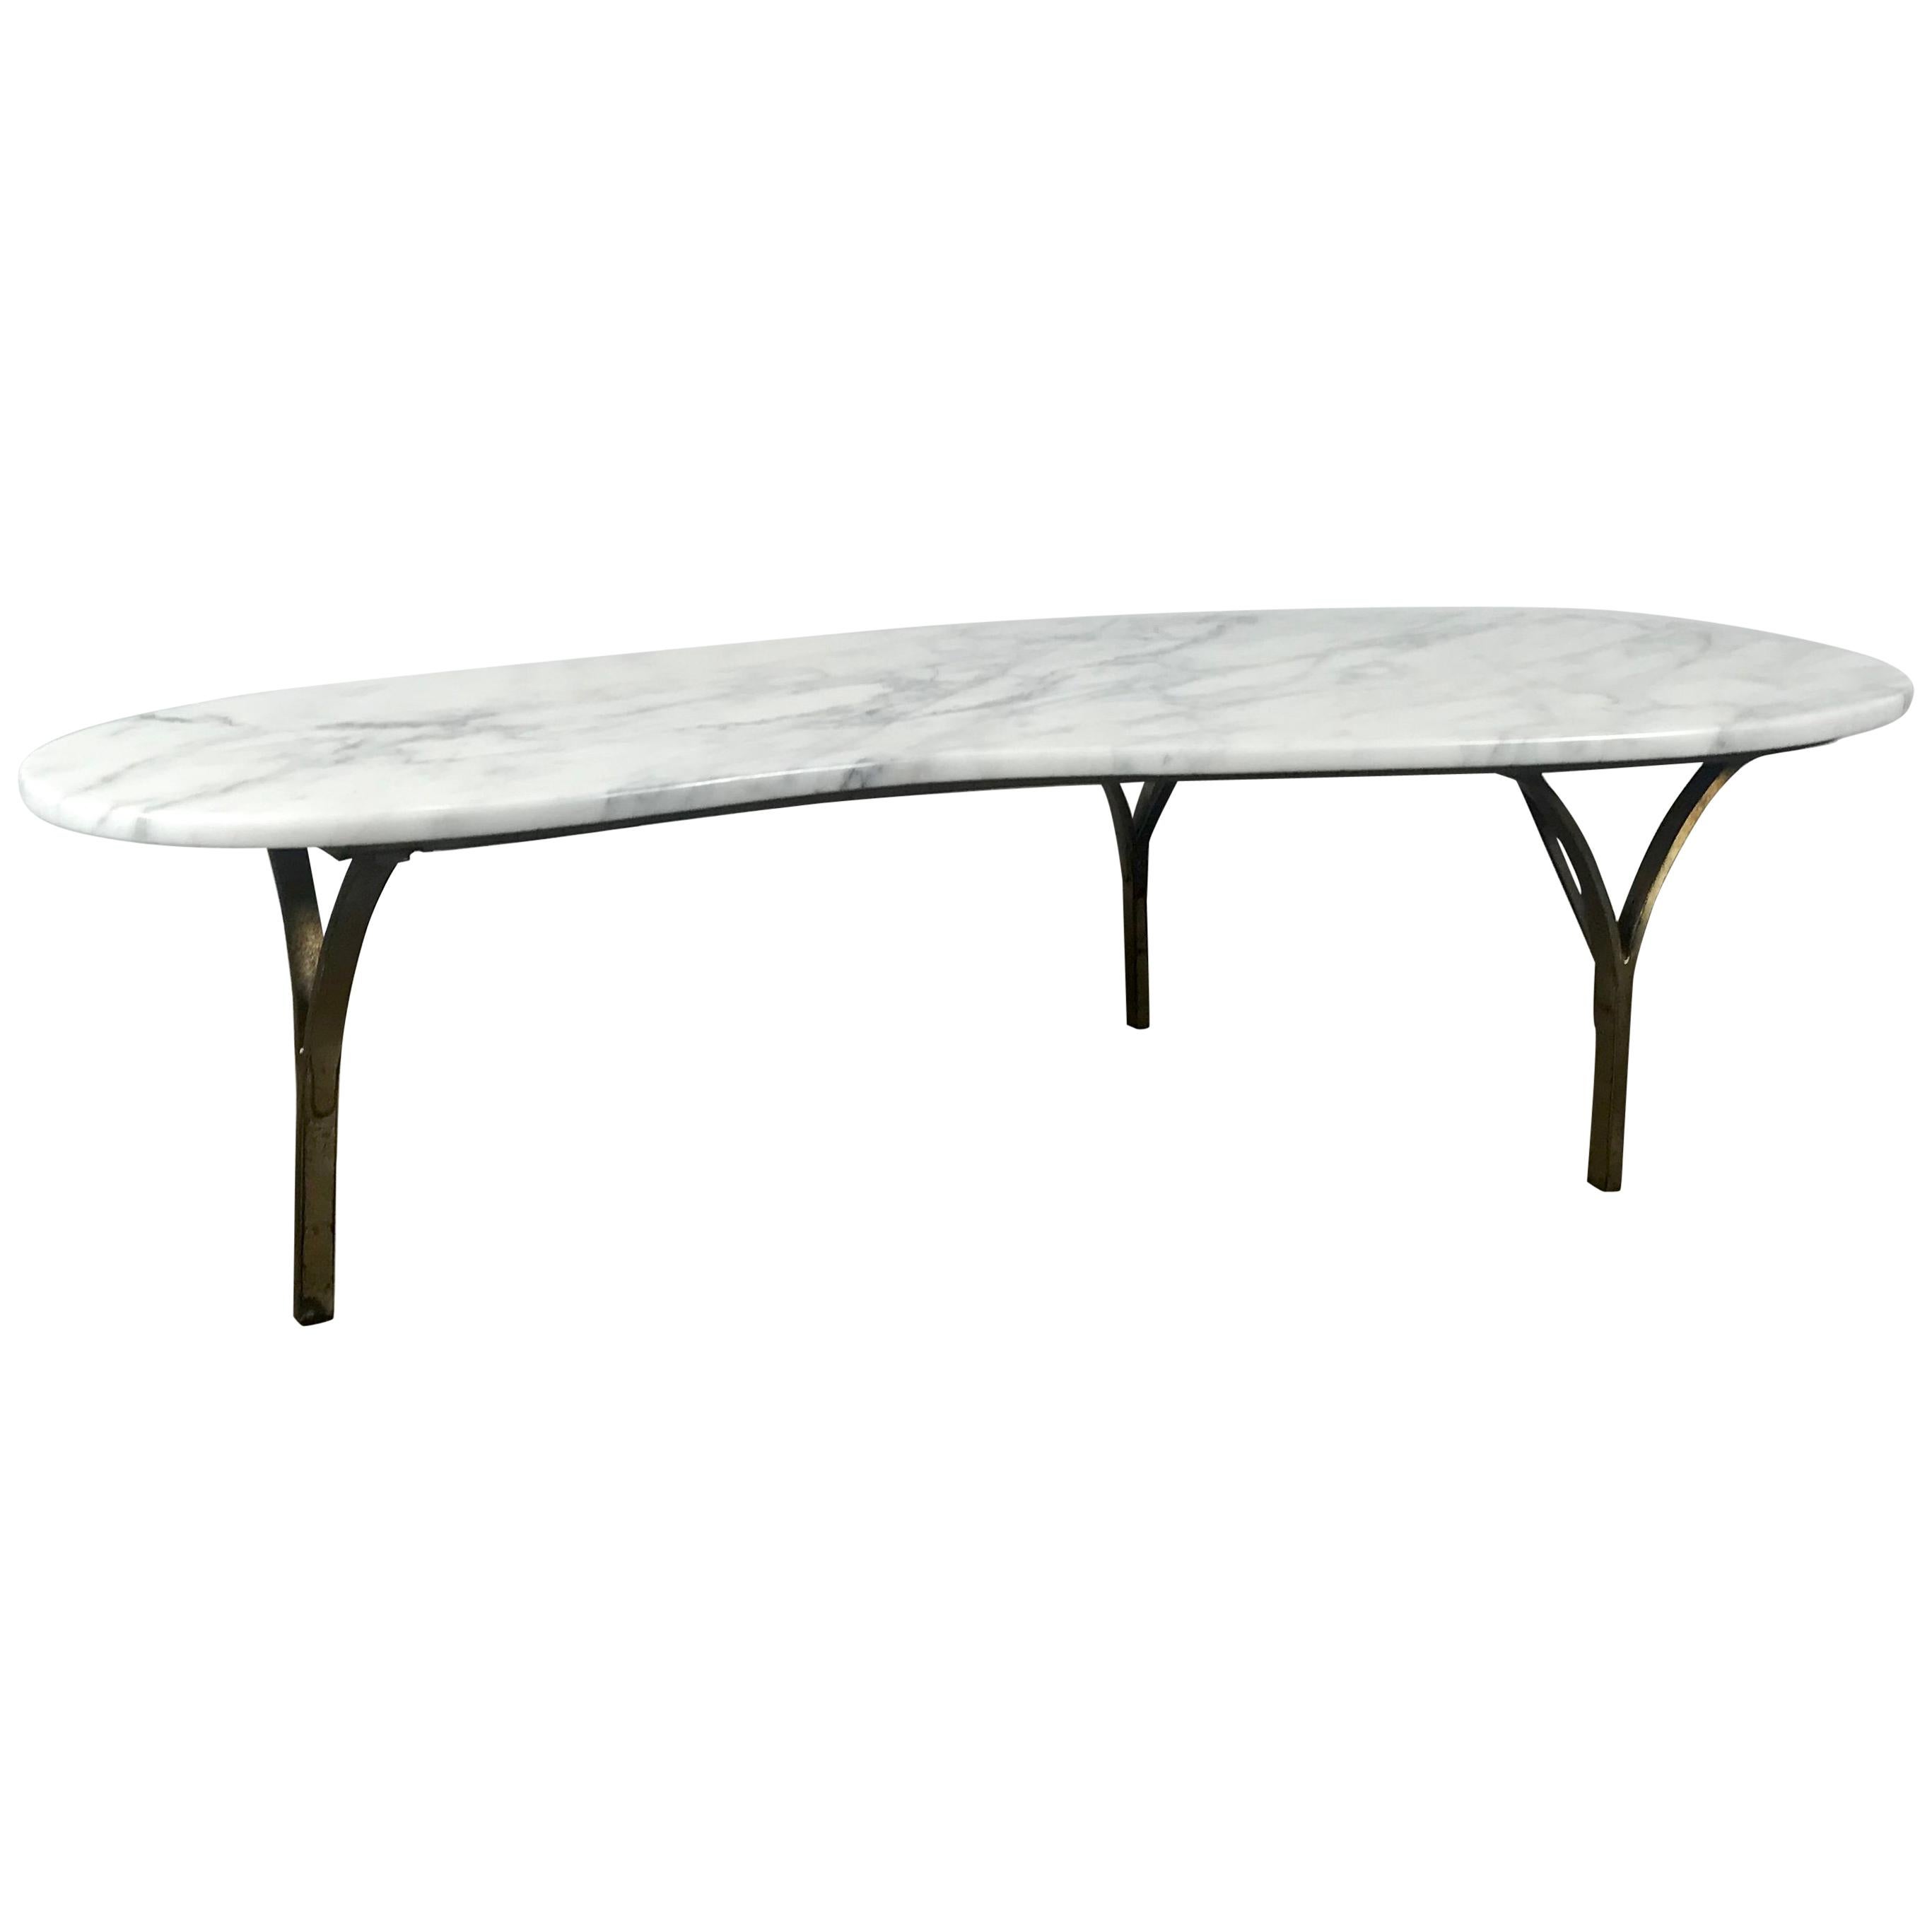 Stunning Kidney Shape Italian Marble and Brass Coffee or Cocktail Table